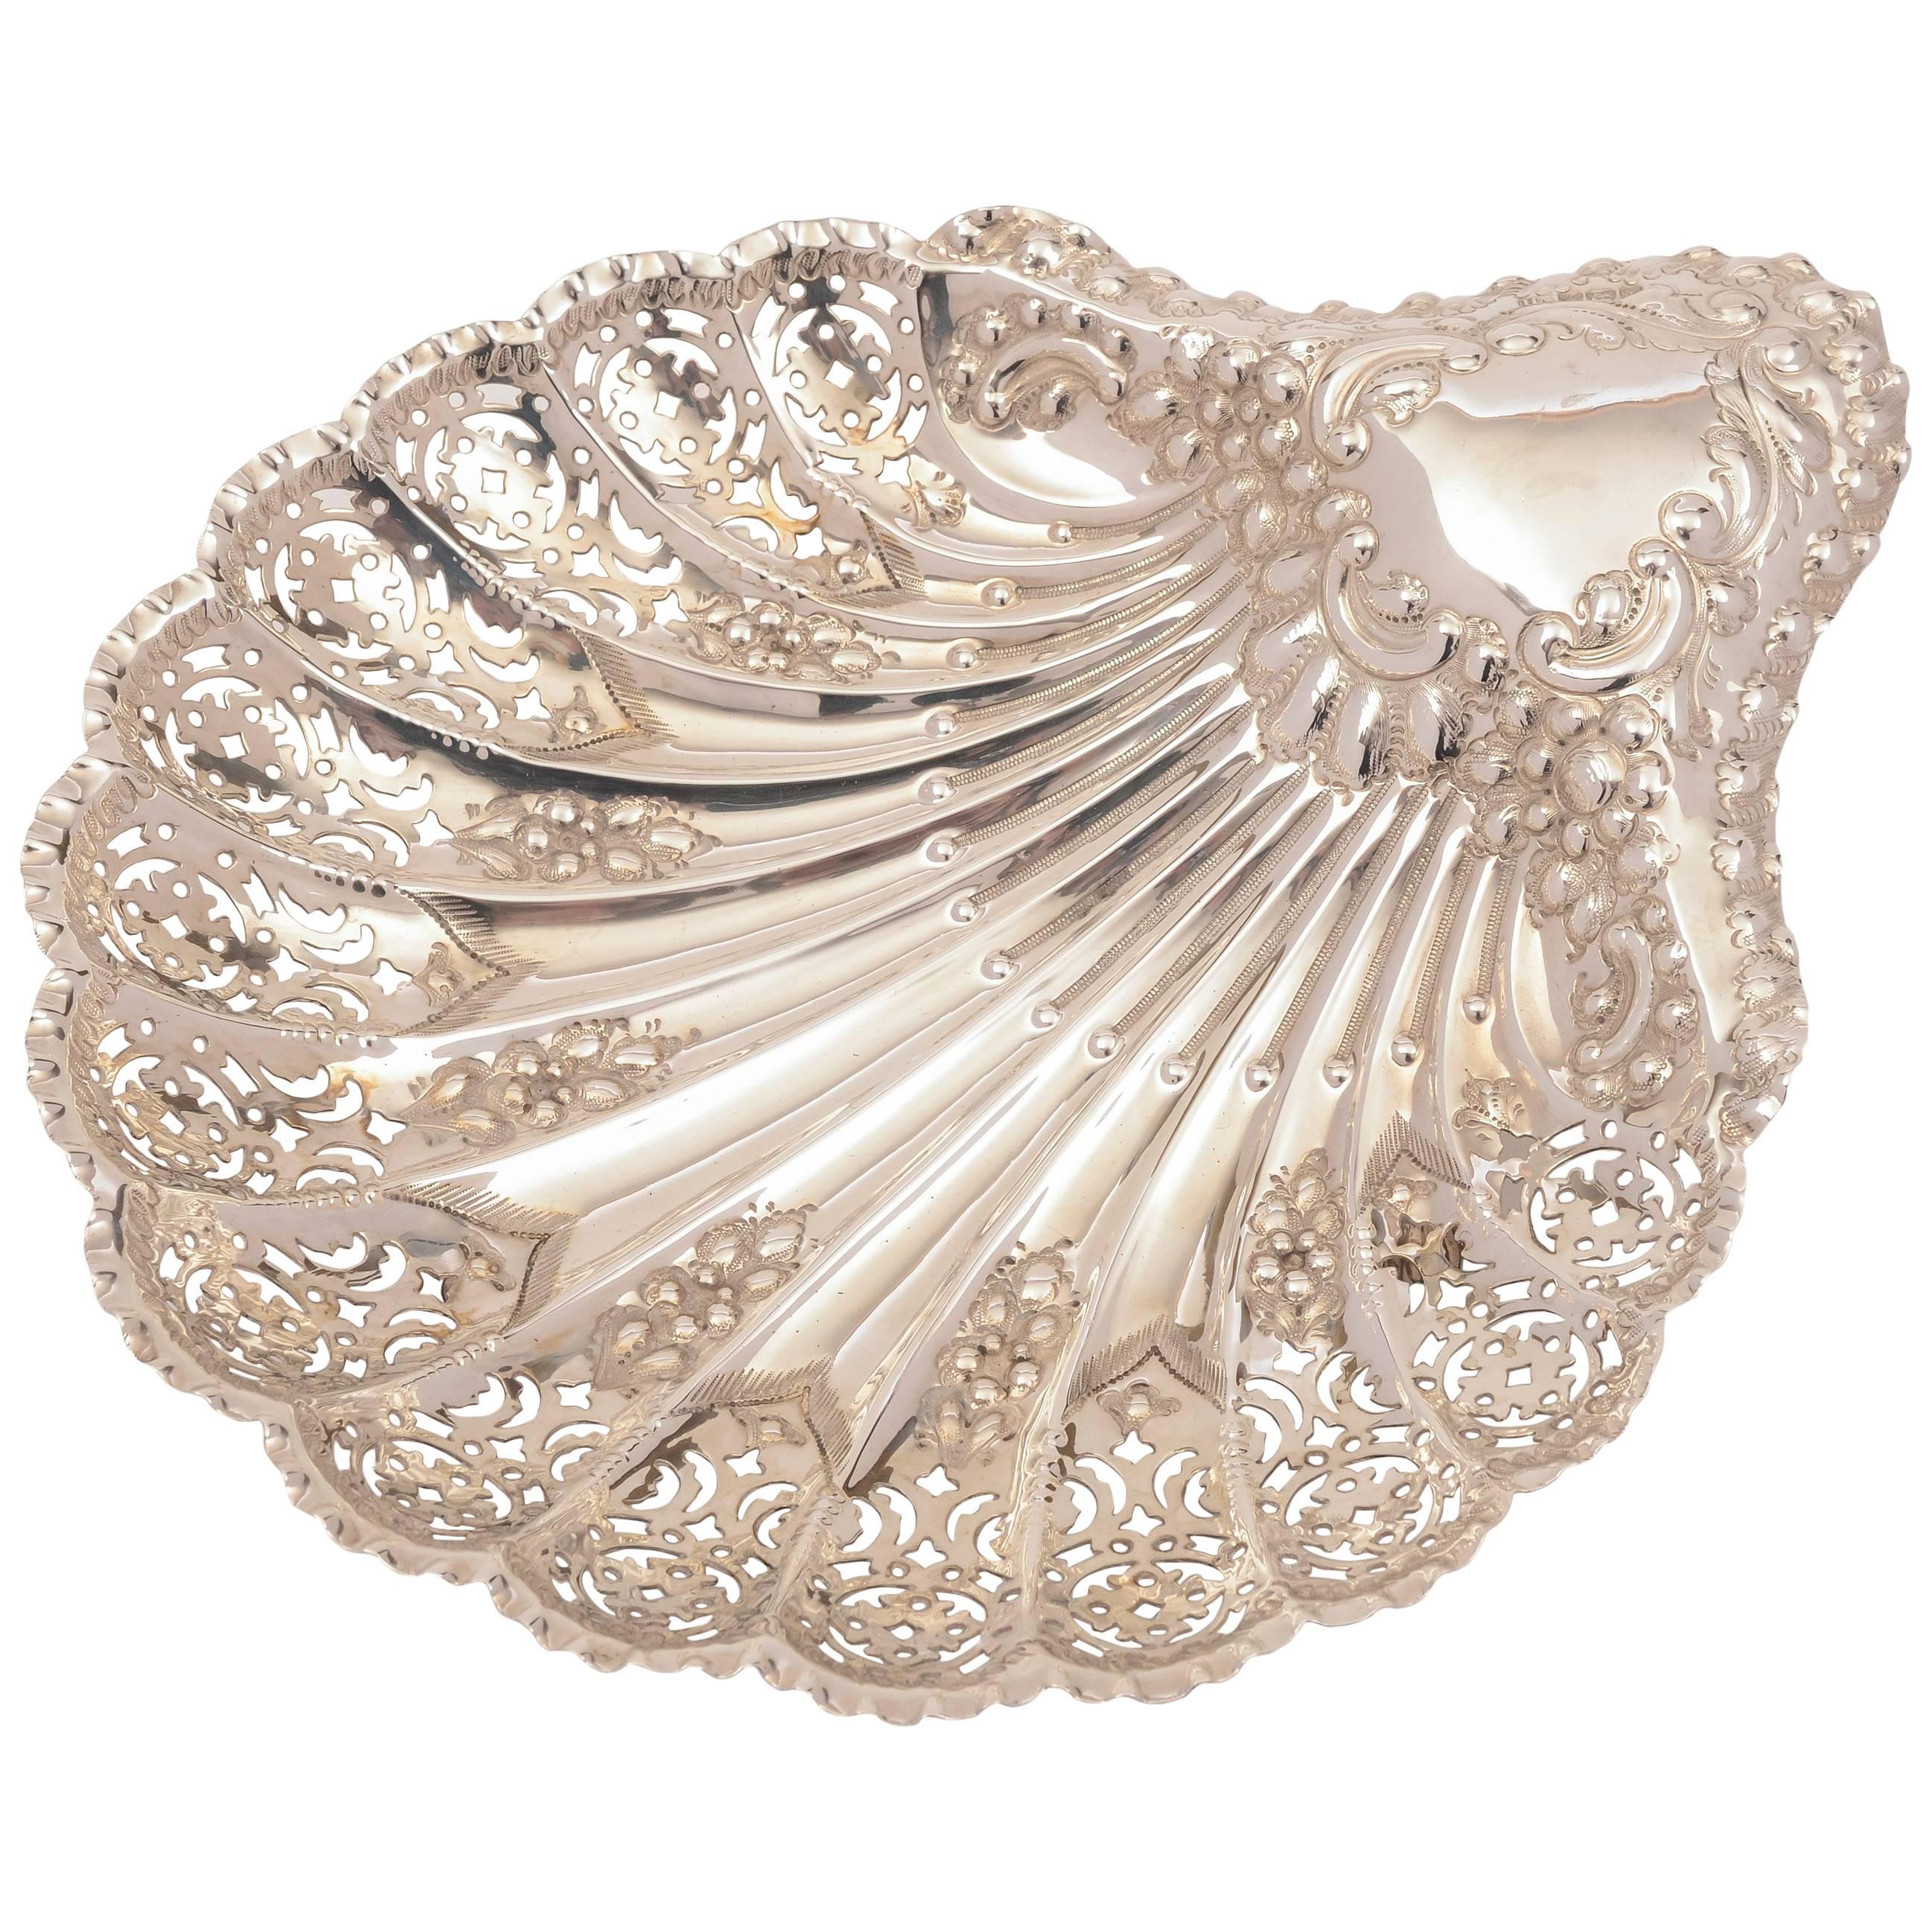 19th Century Silver Shell-Shaped Serving Dish For Sale